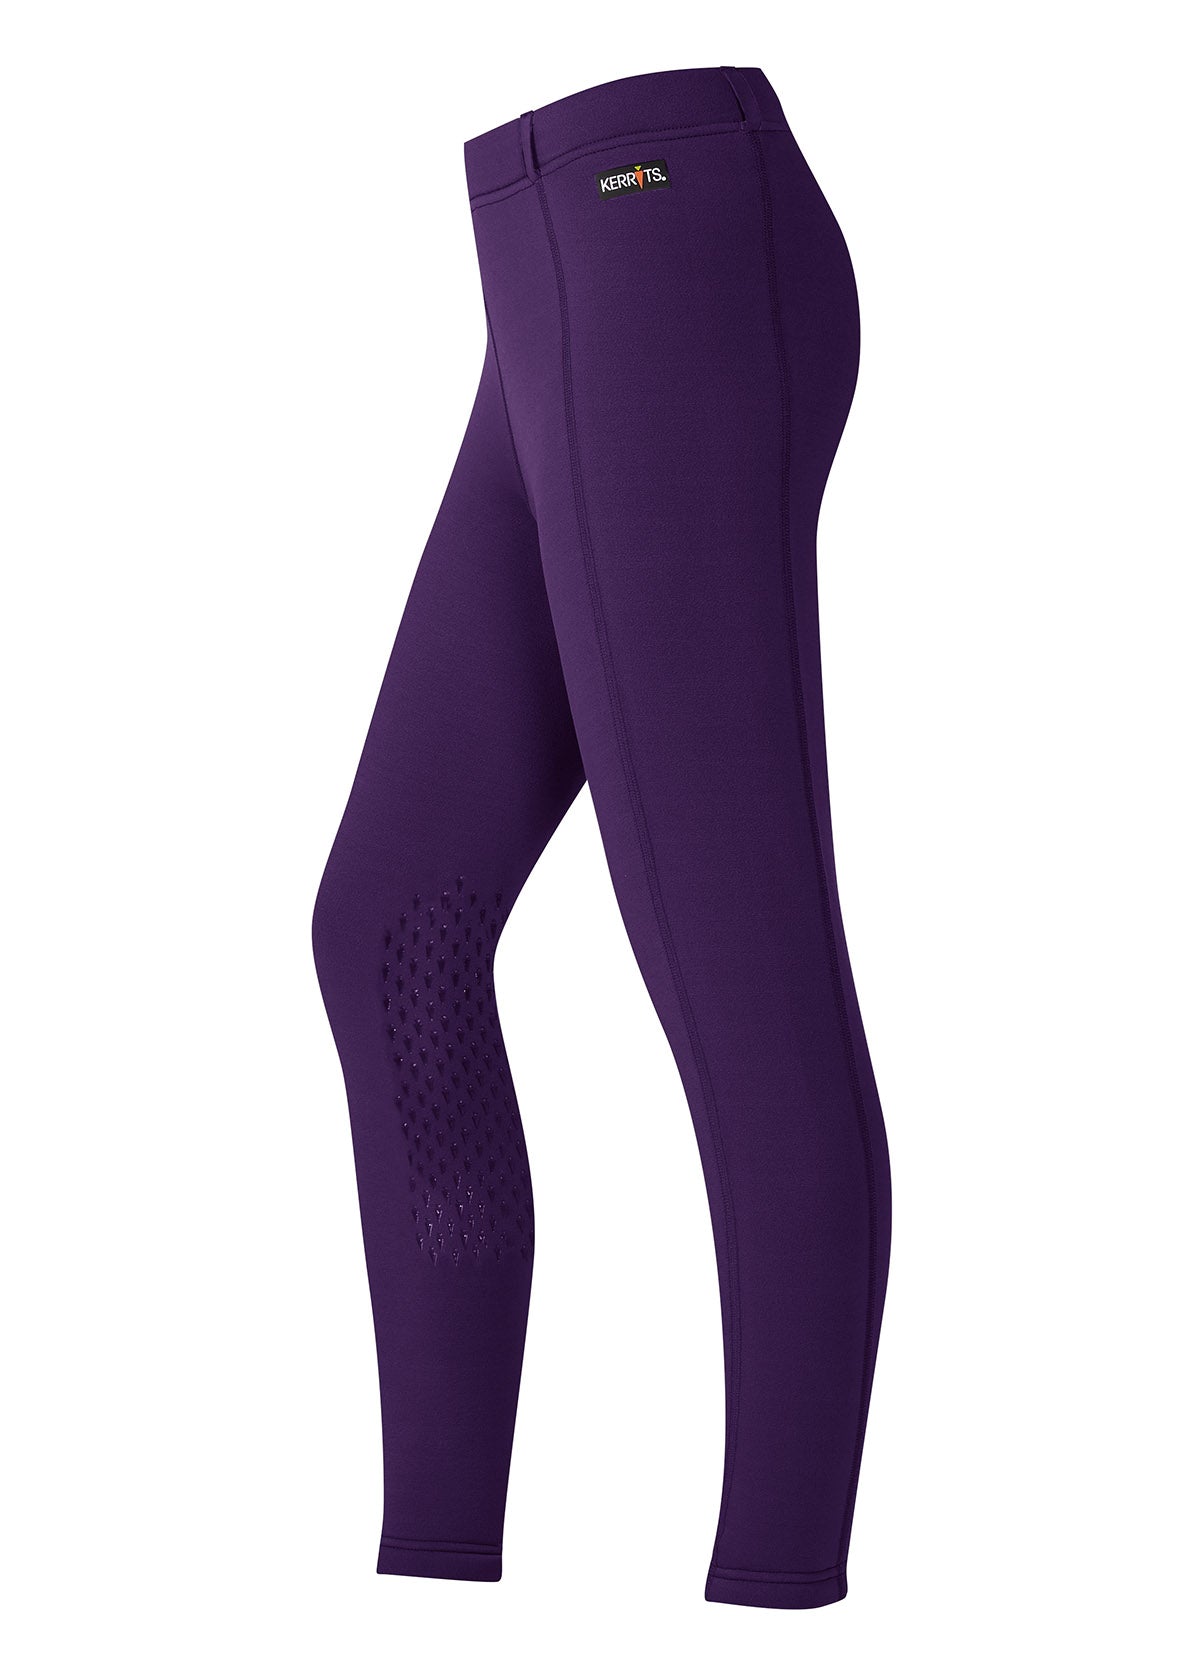 Kerrits Powerstretch Pocket Tights II Review – The Comfy Horse